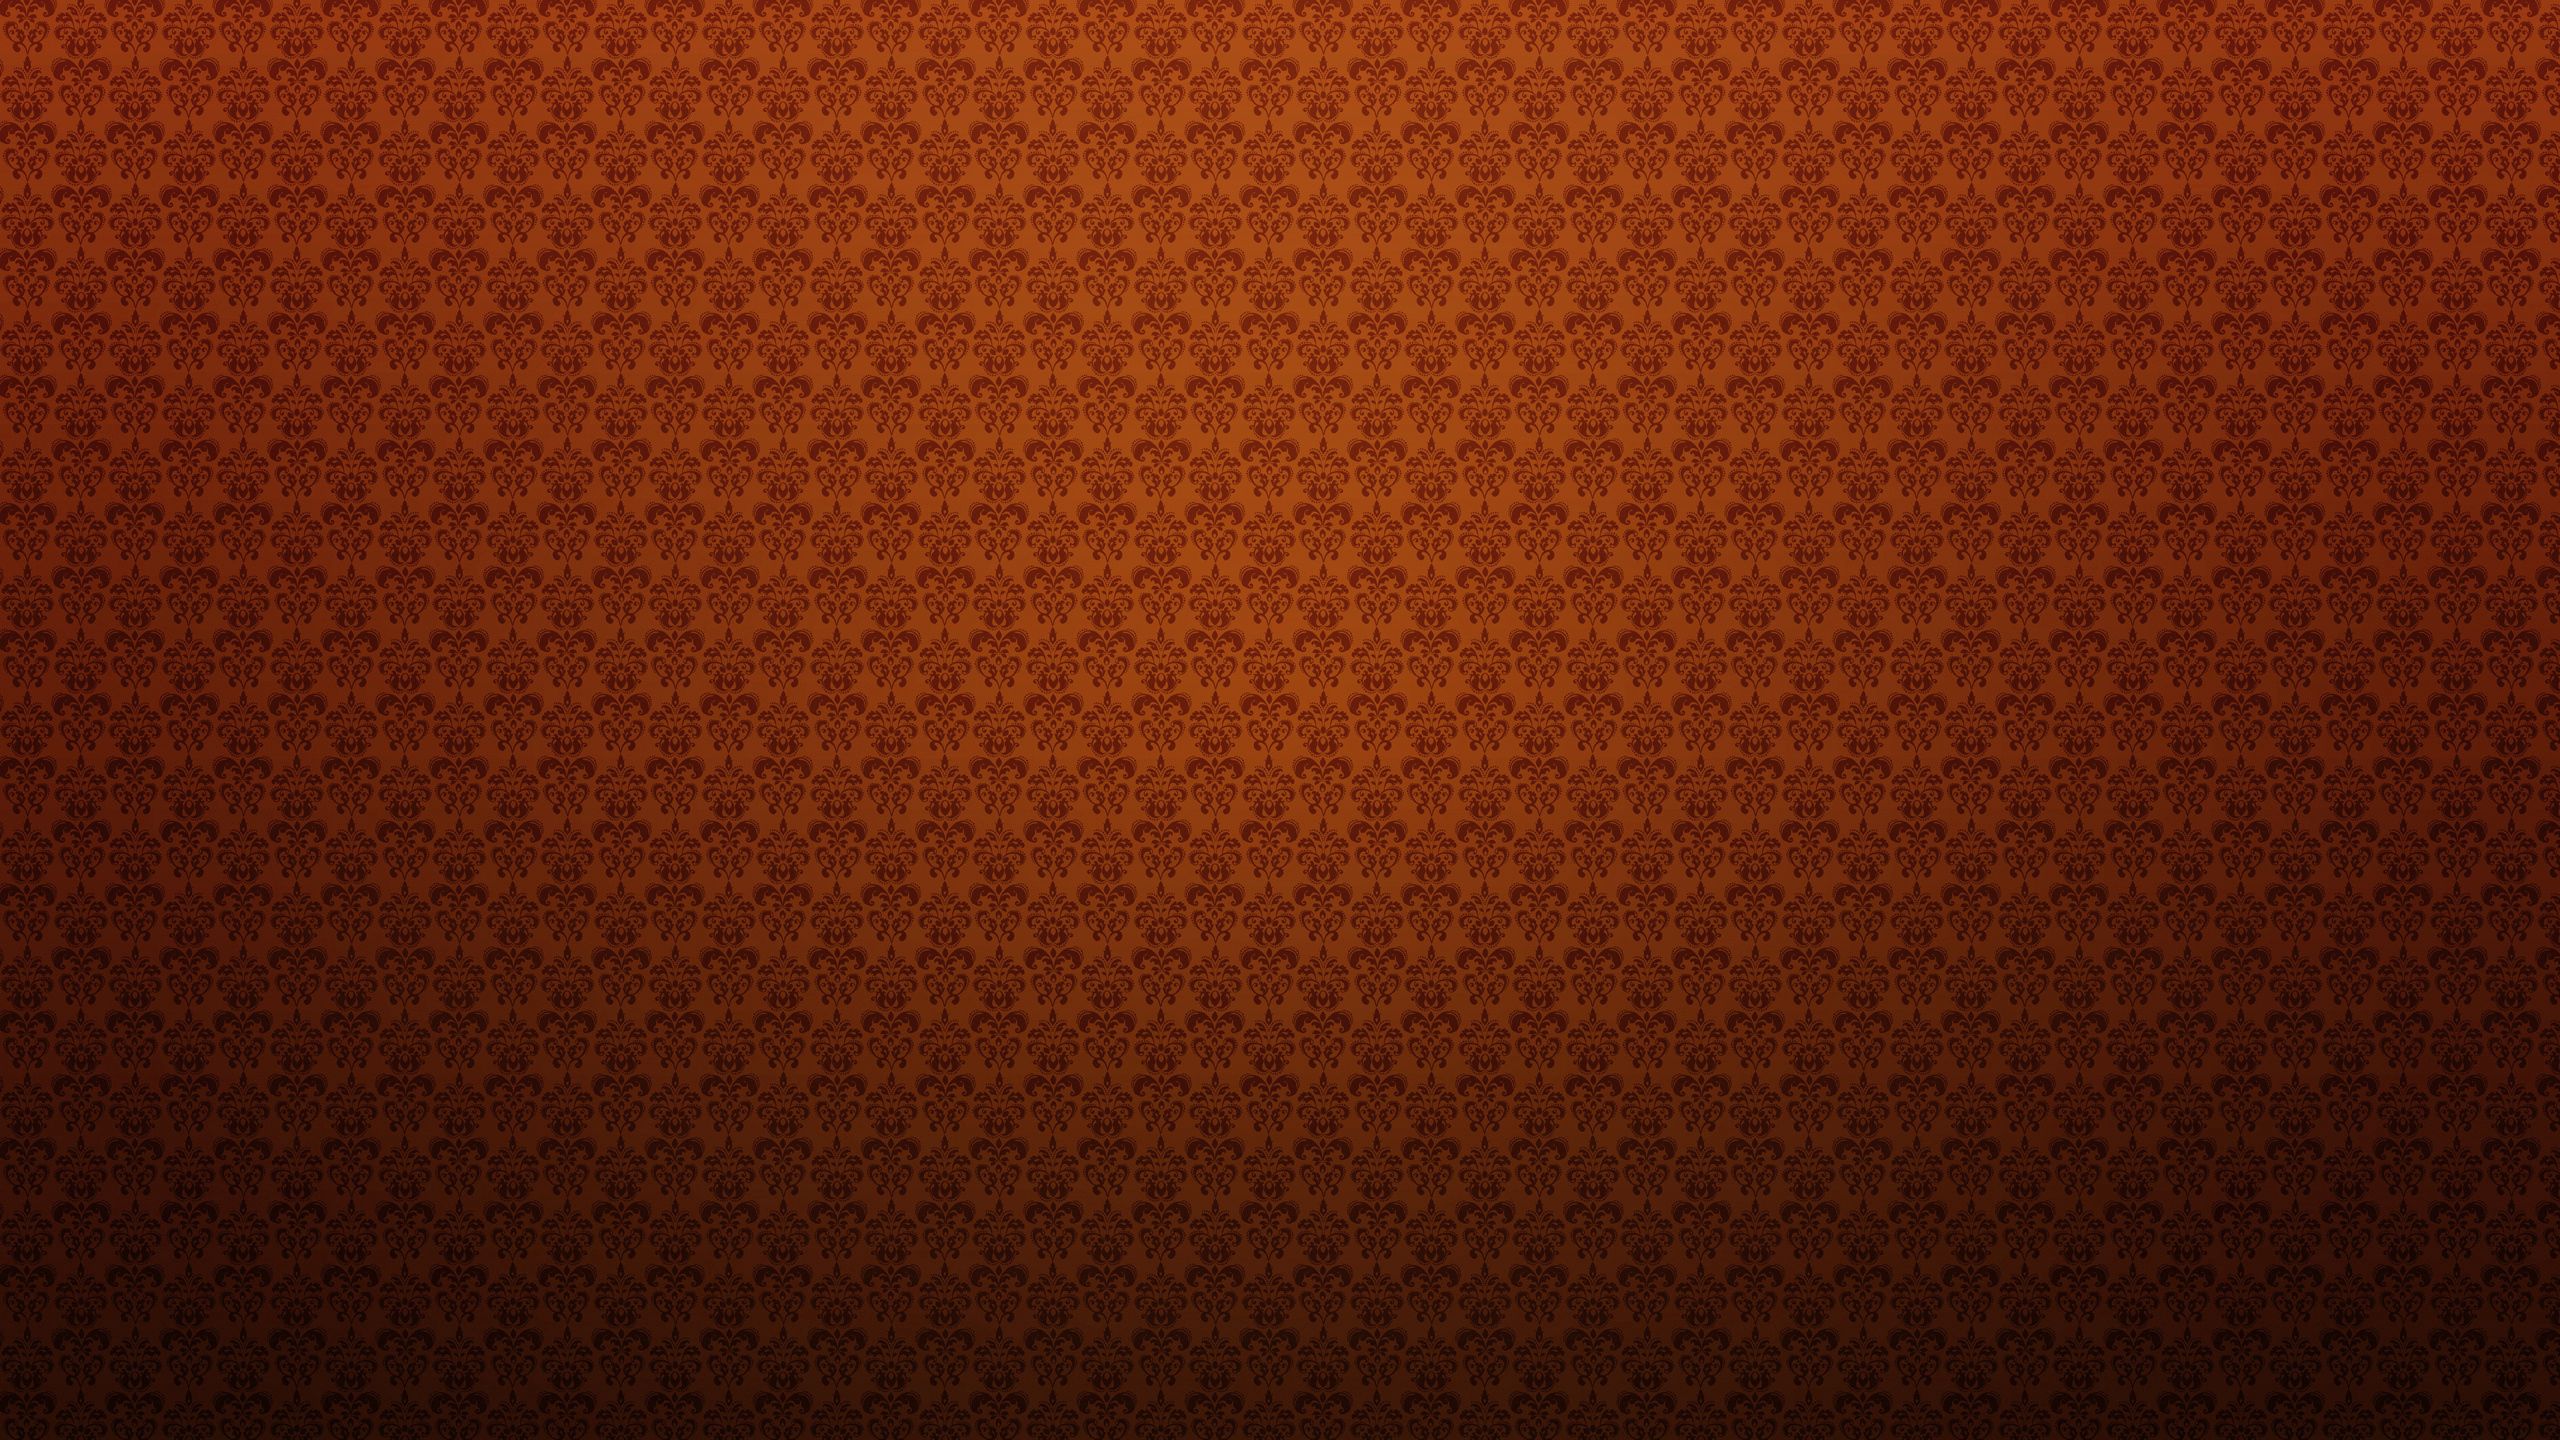 Download wallpaper 2560x1440 patterns, light, colorful, texture ...